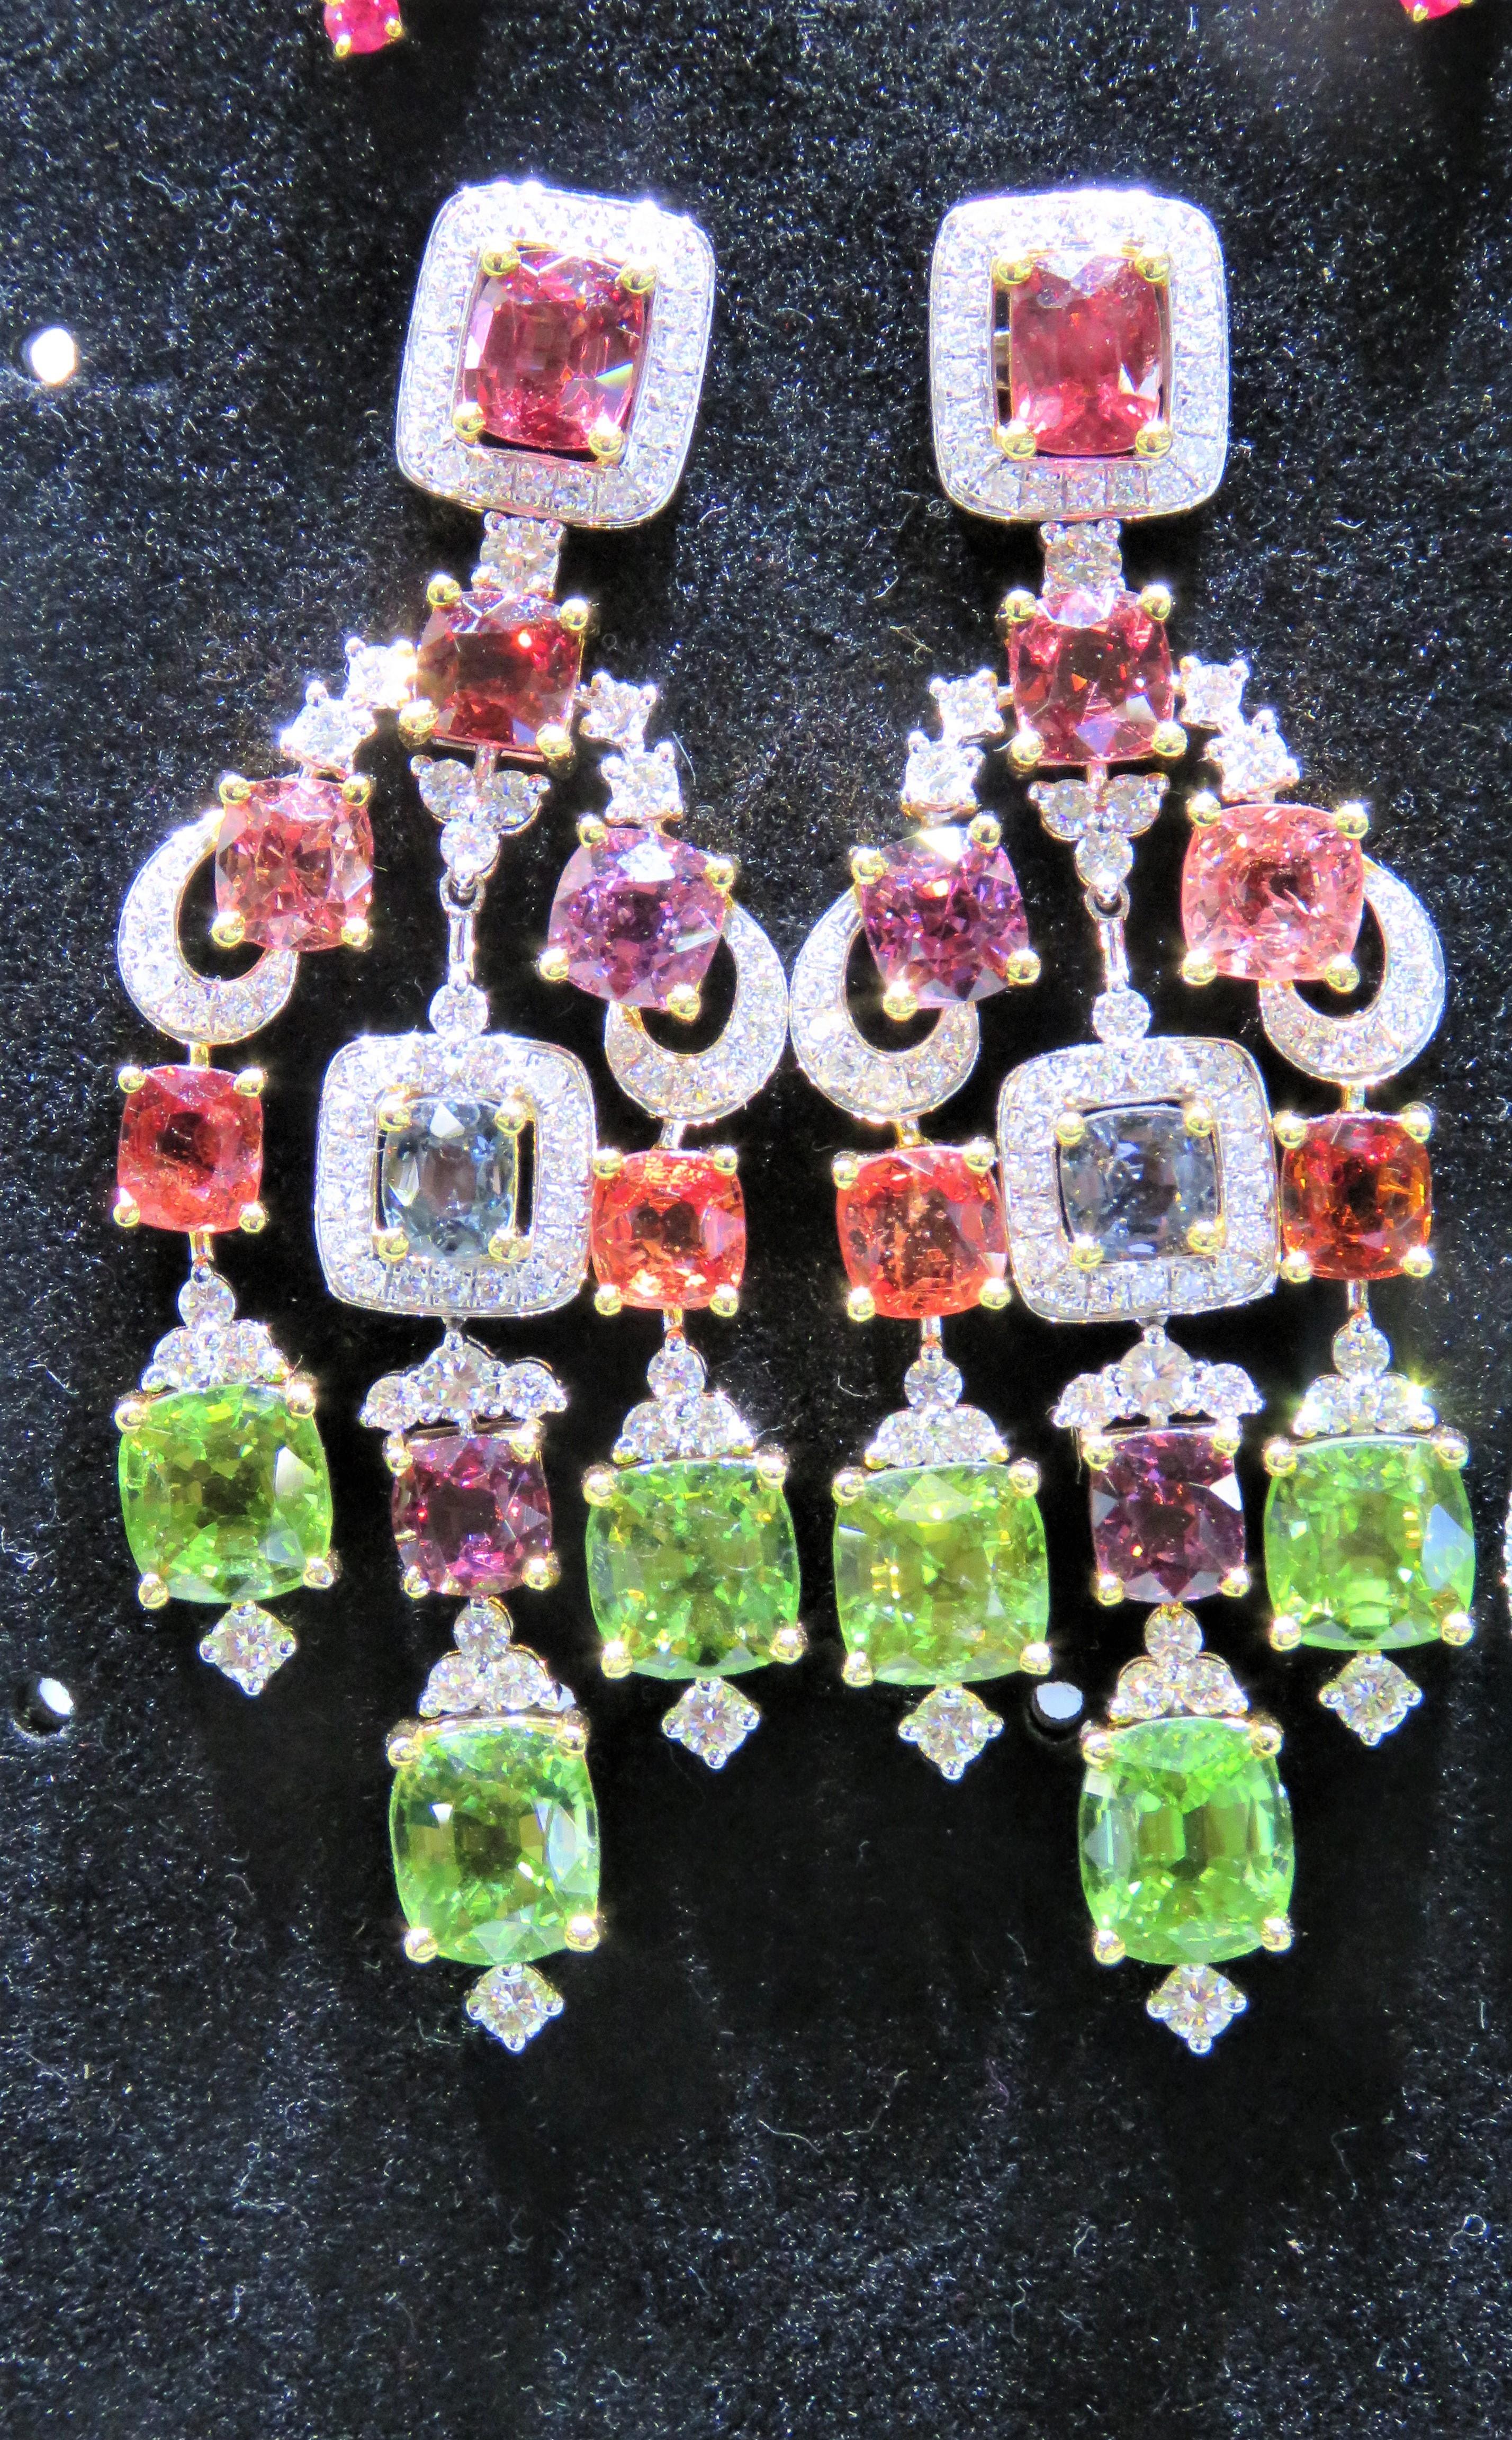 The Following Items we are offering is this Rare Important Radiant 18KT Gold Gorgeous Glittering and Sparkling Magnificent Fancy Rainbow Multi Color Spinel Diamond Dangle Earrings. Earrings contain approx 28CTS of Beautiful Fancy Colored Spinels and